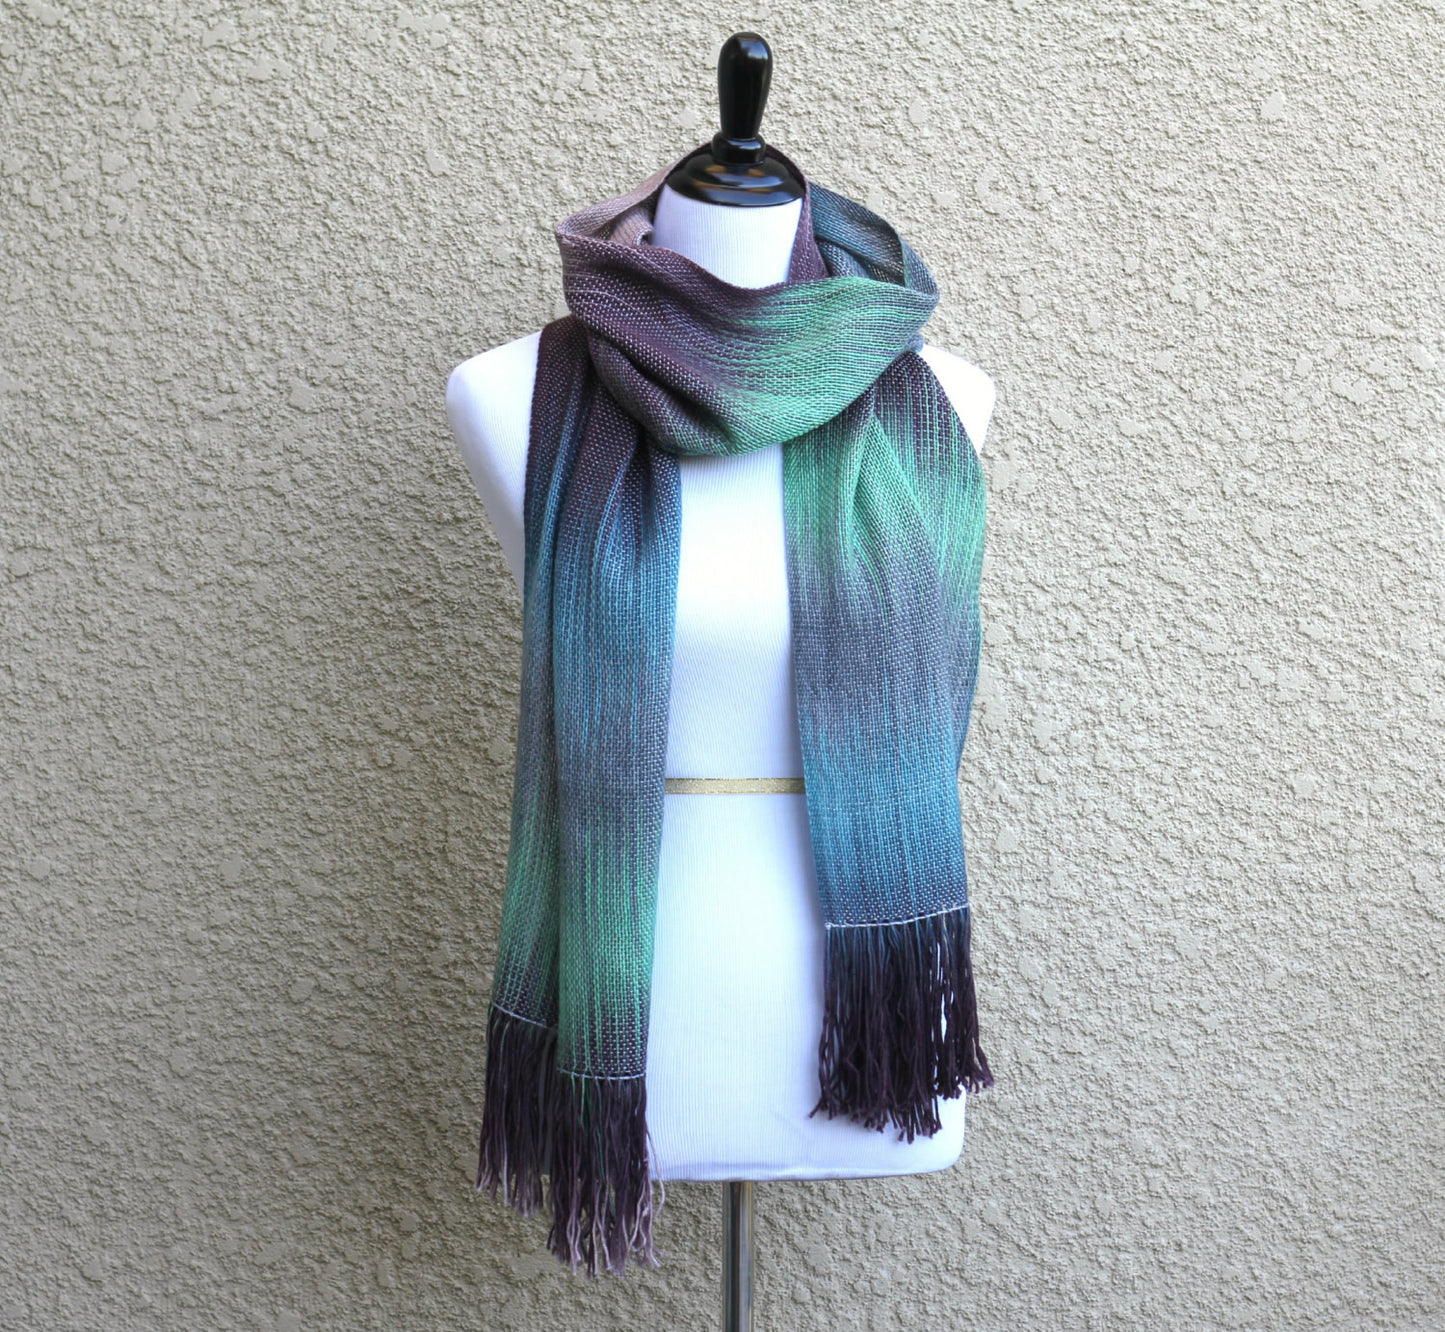 Woven scarf in green, blue and brown colors